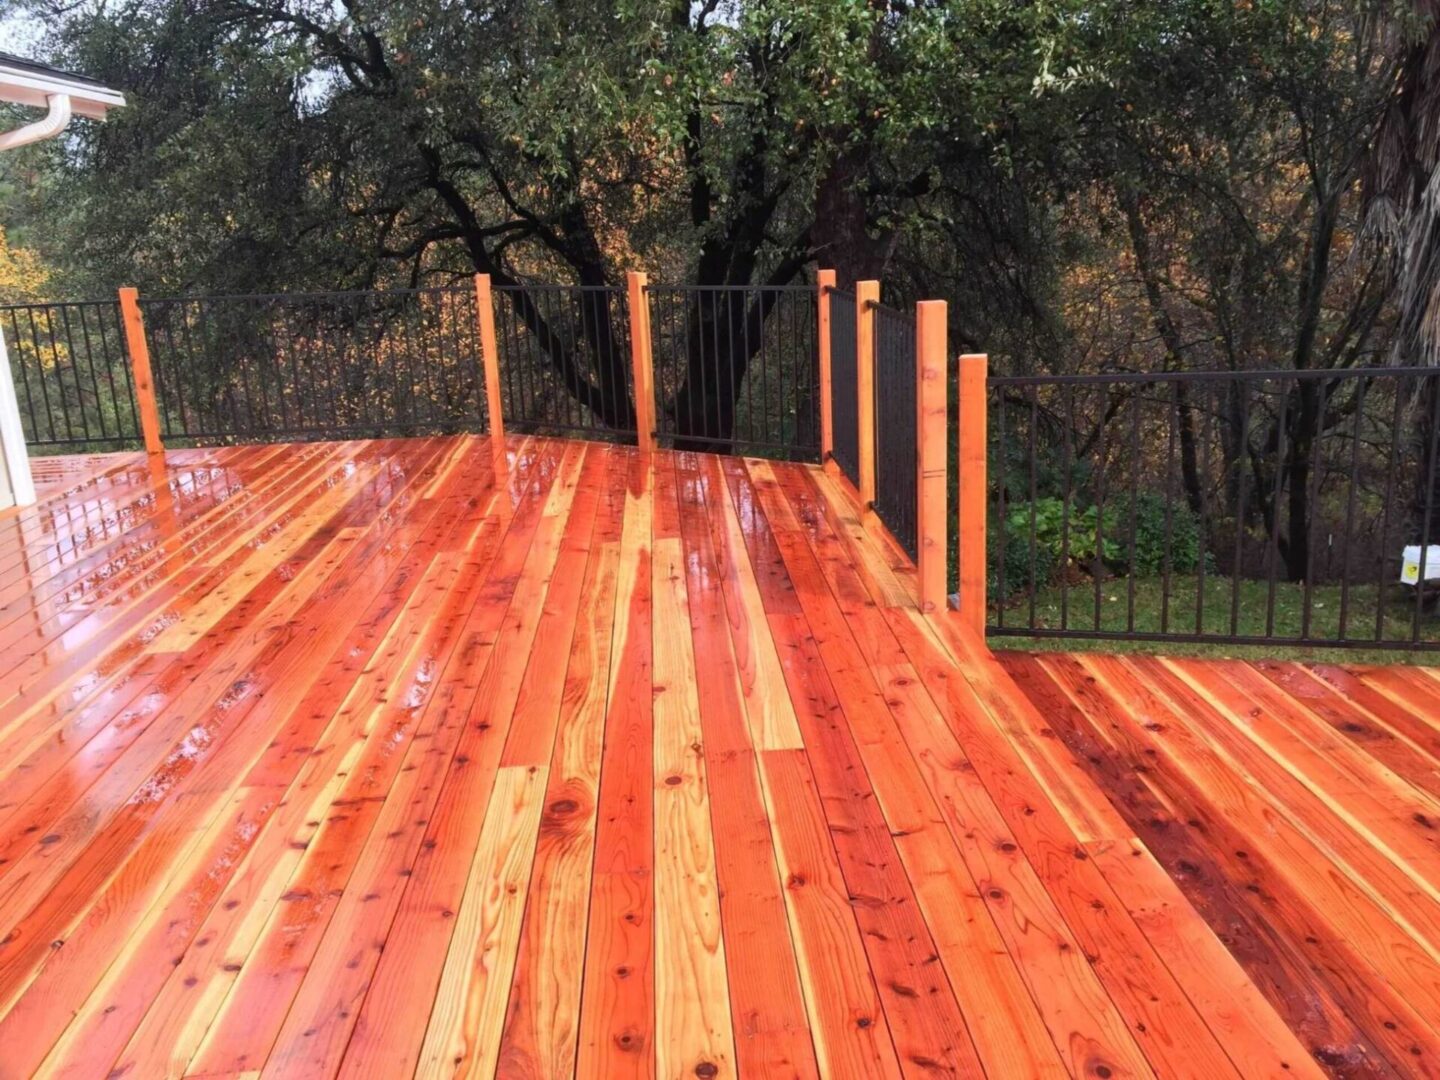 A wooden deck with trees in the background